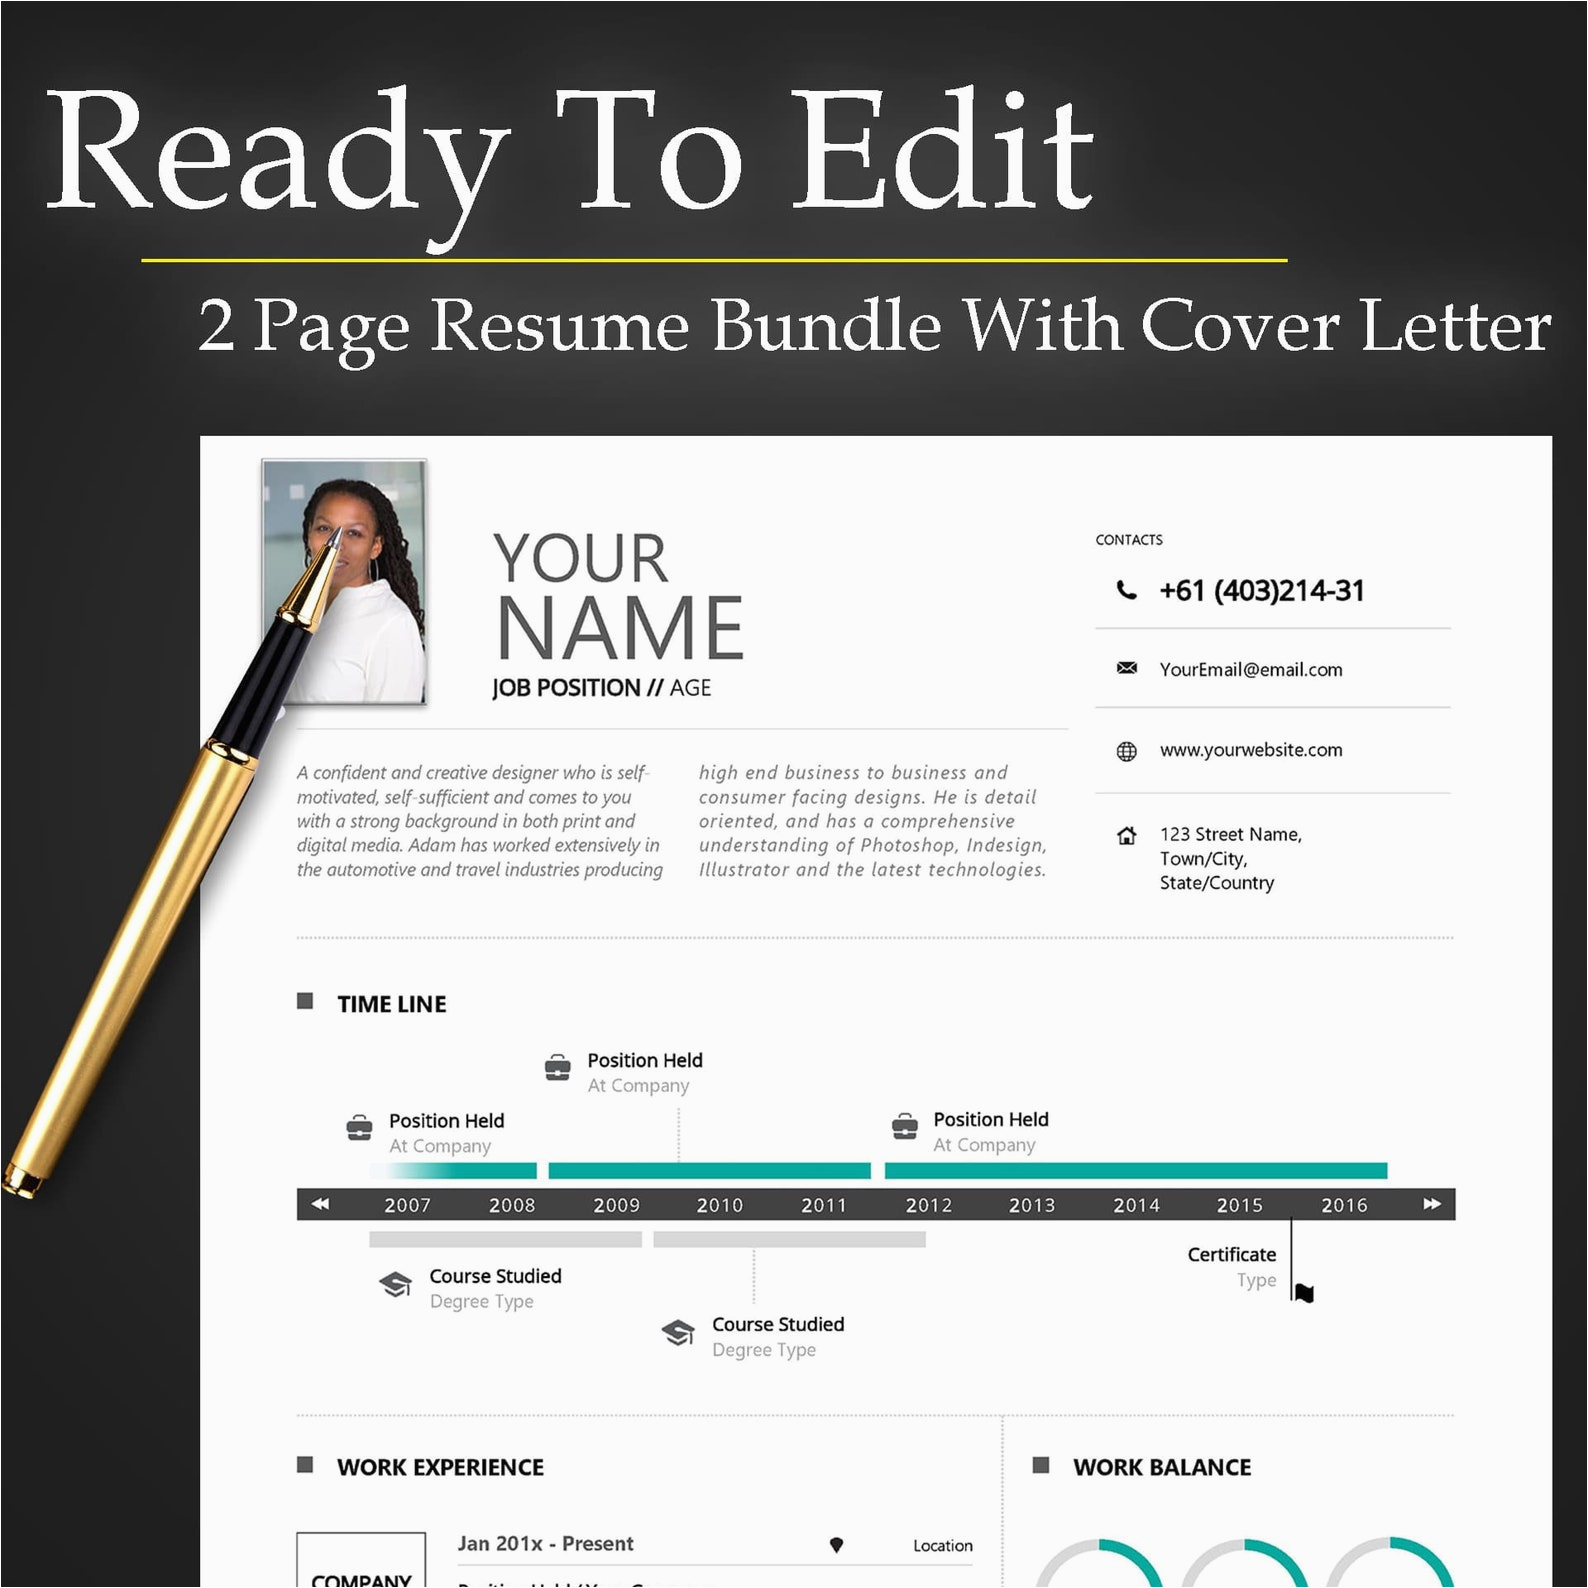 Sample Resume format that Can Be Edited Classic Ready to Edit Resume Template with Cover Letter